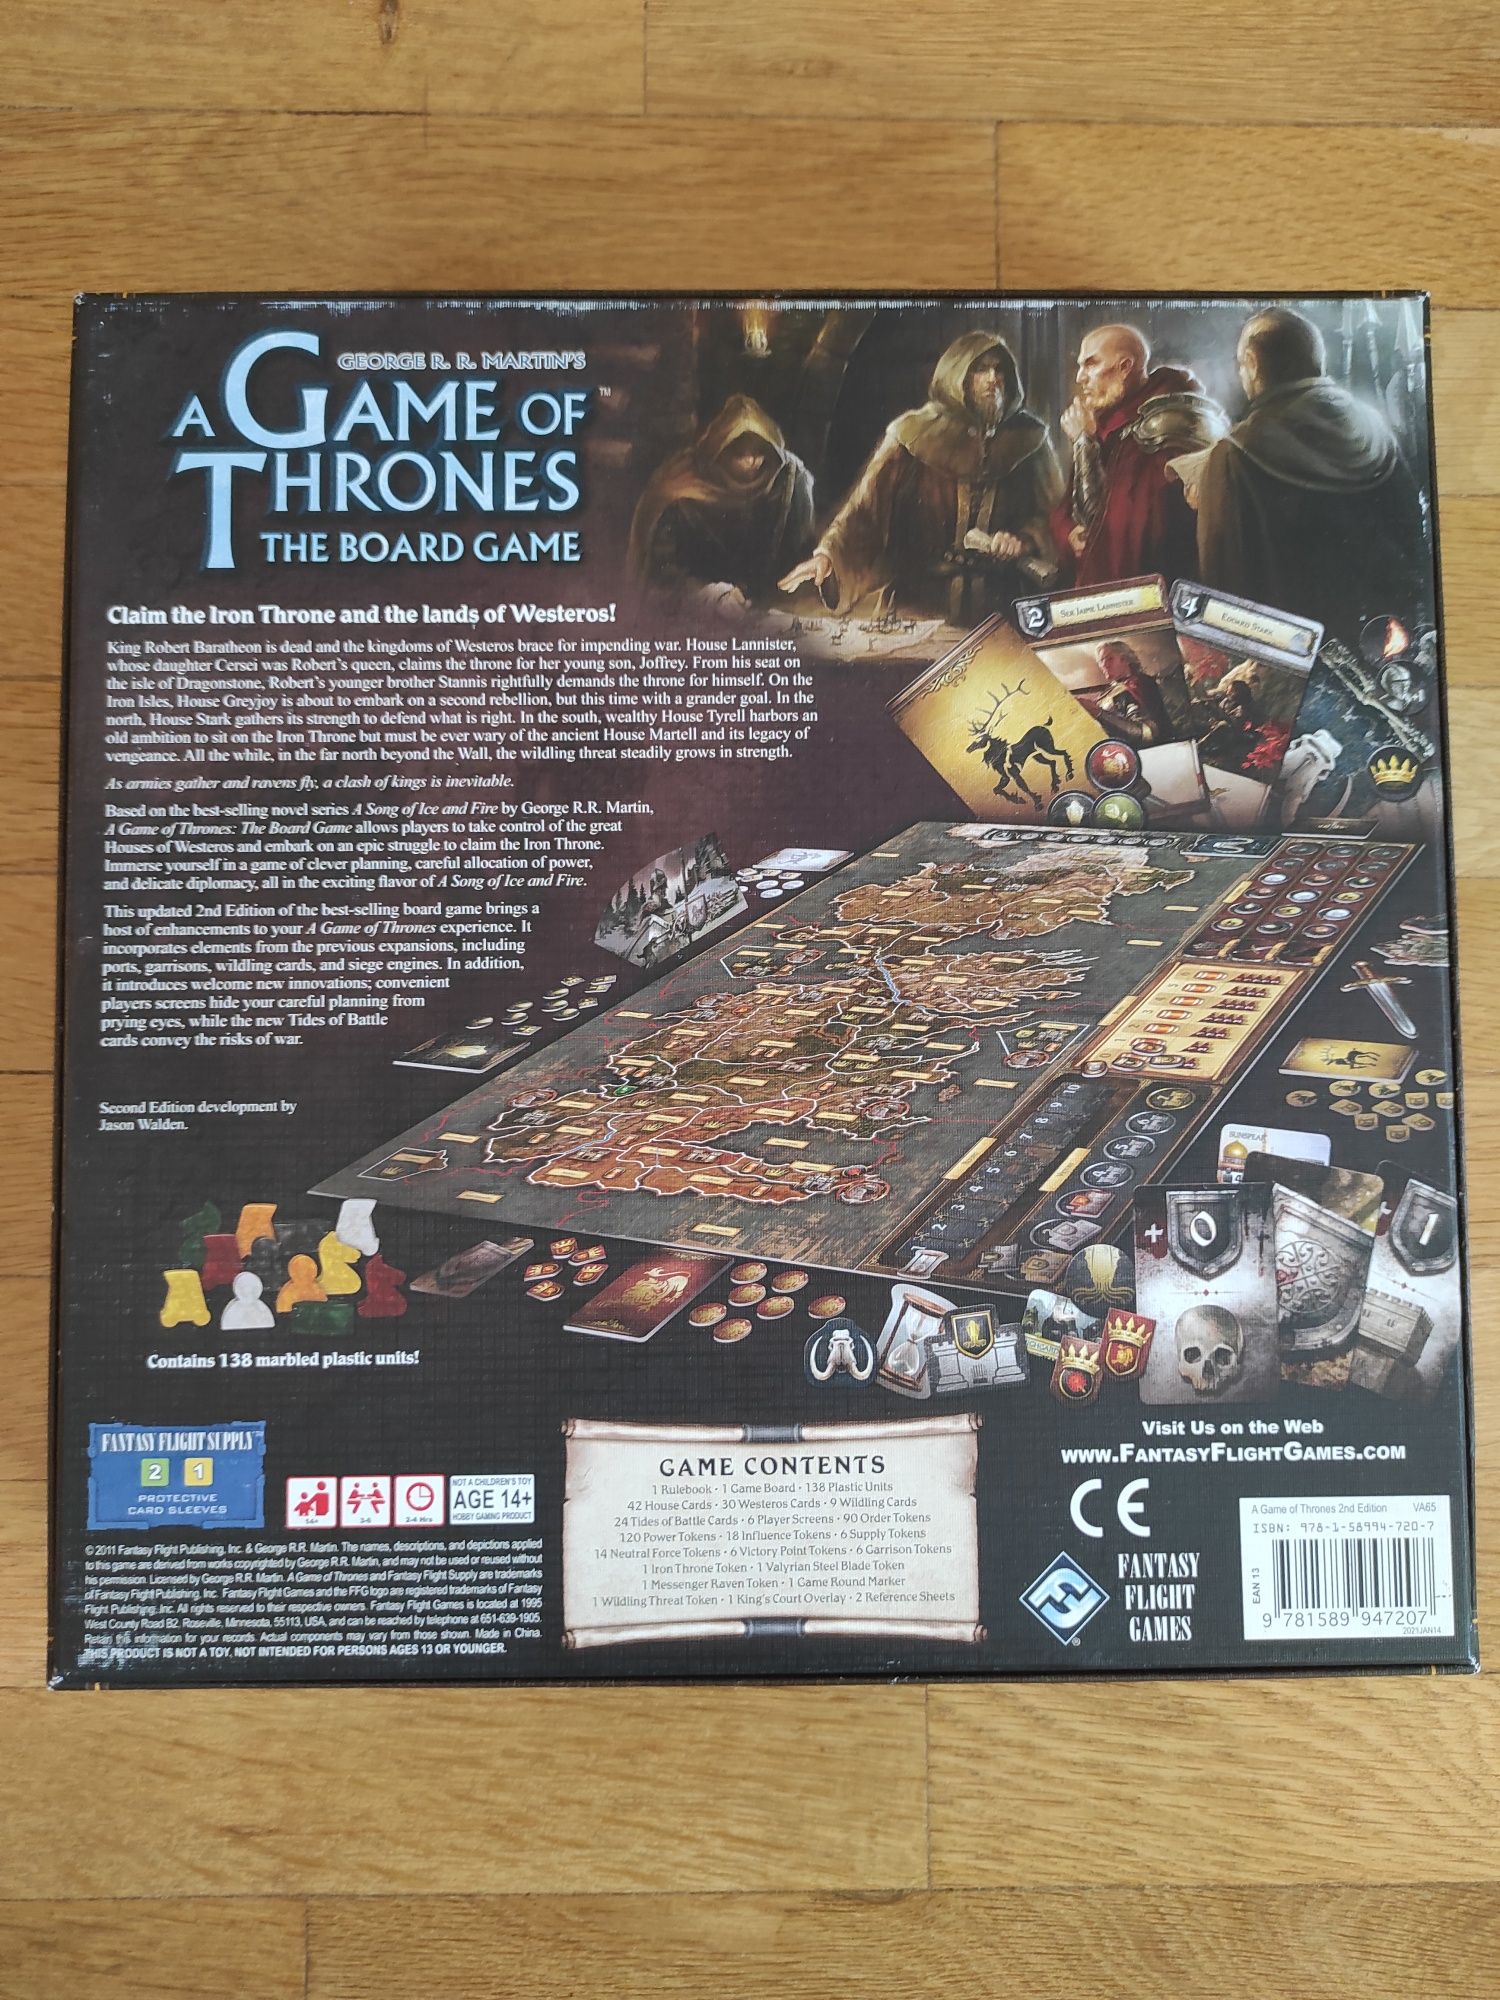 A Game of Thrones, The board game